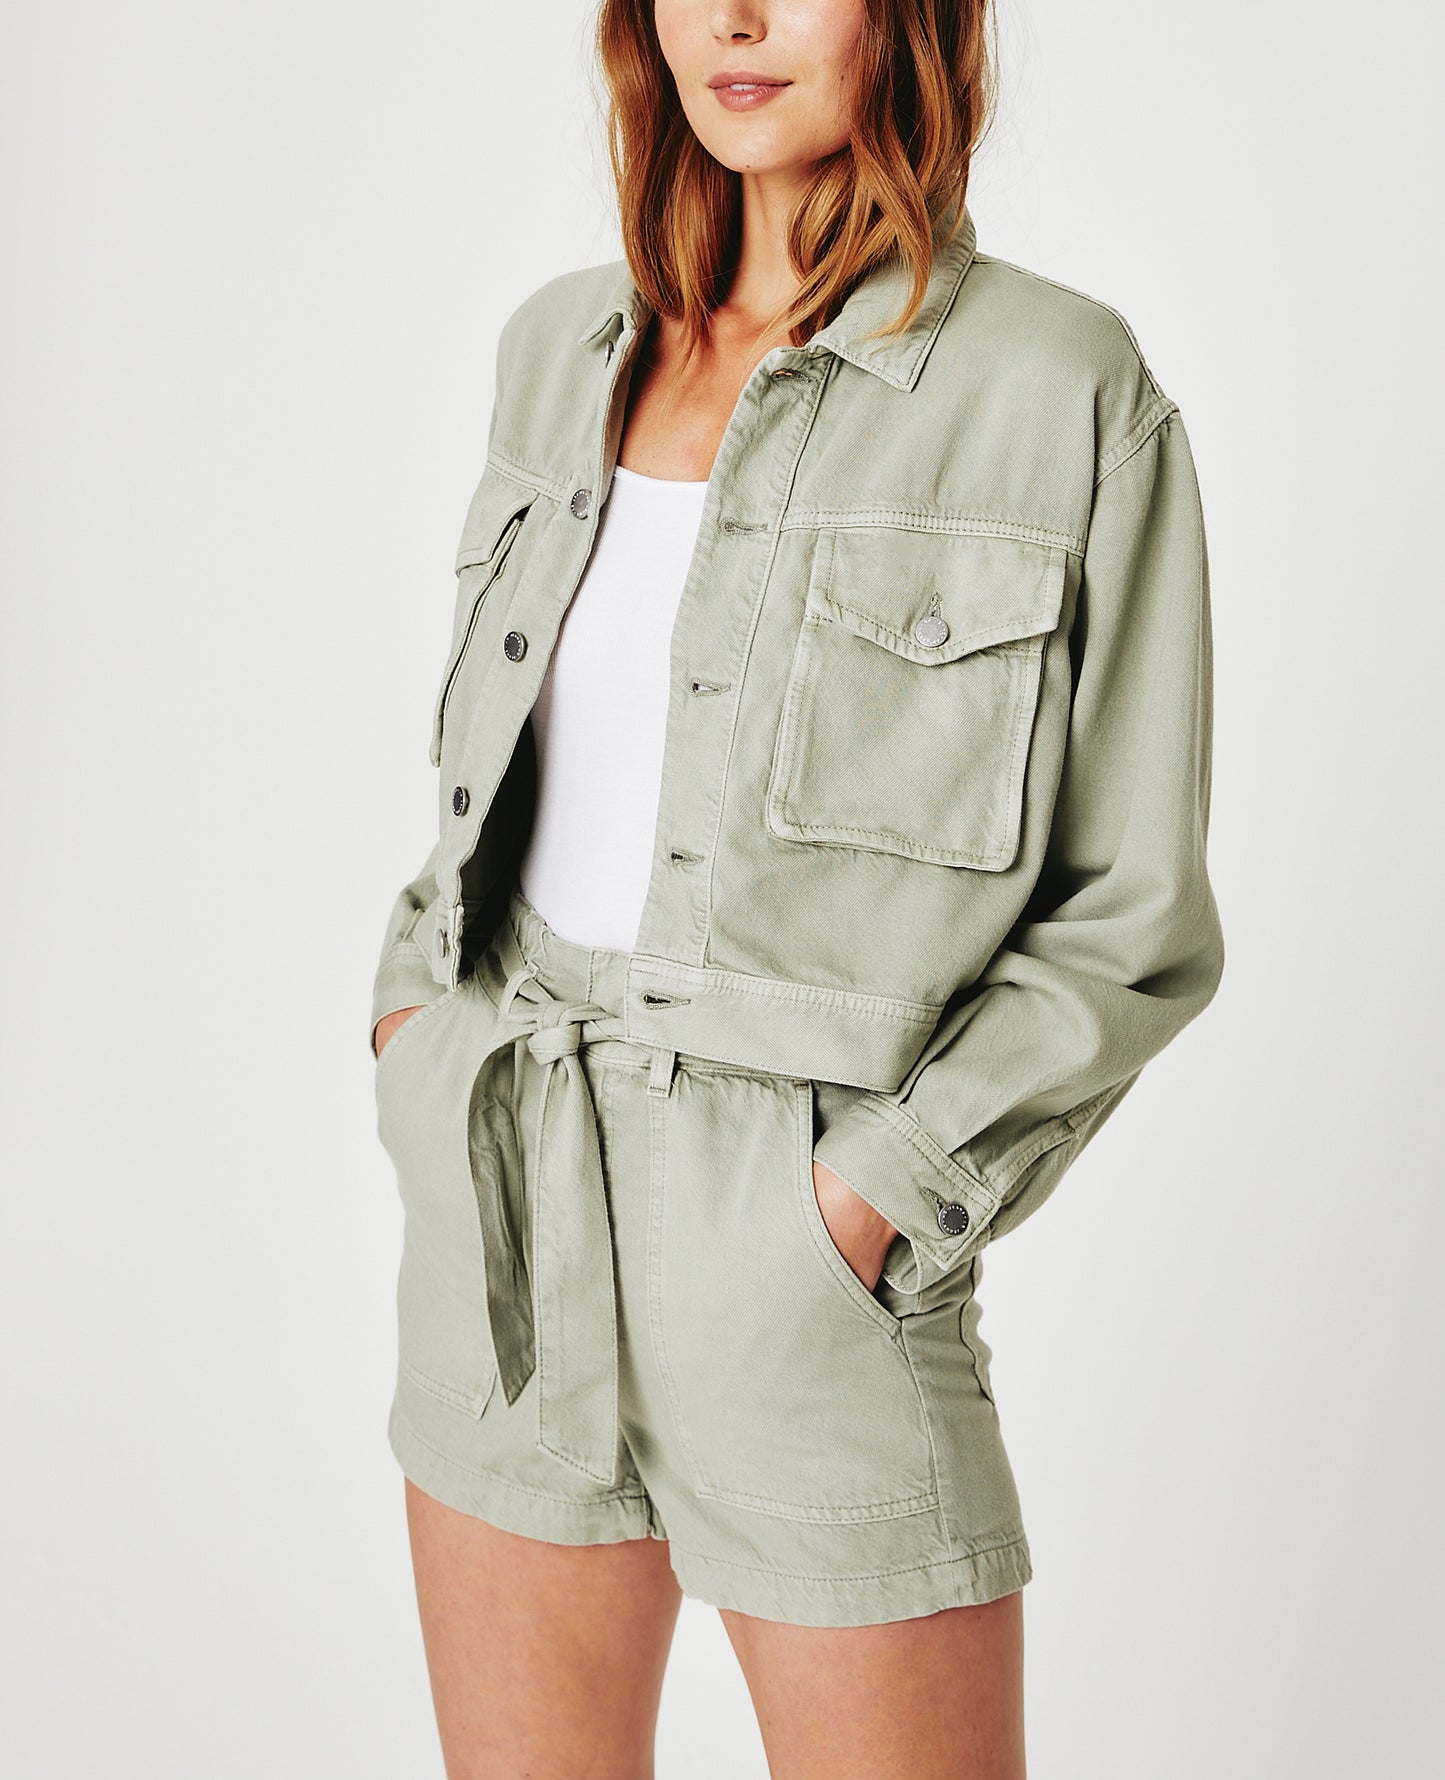 Mirah Cropped Trucker Jacket Sulfur Natural Agave Cropped Trucker Jacket Women Tops Photo 1